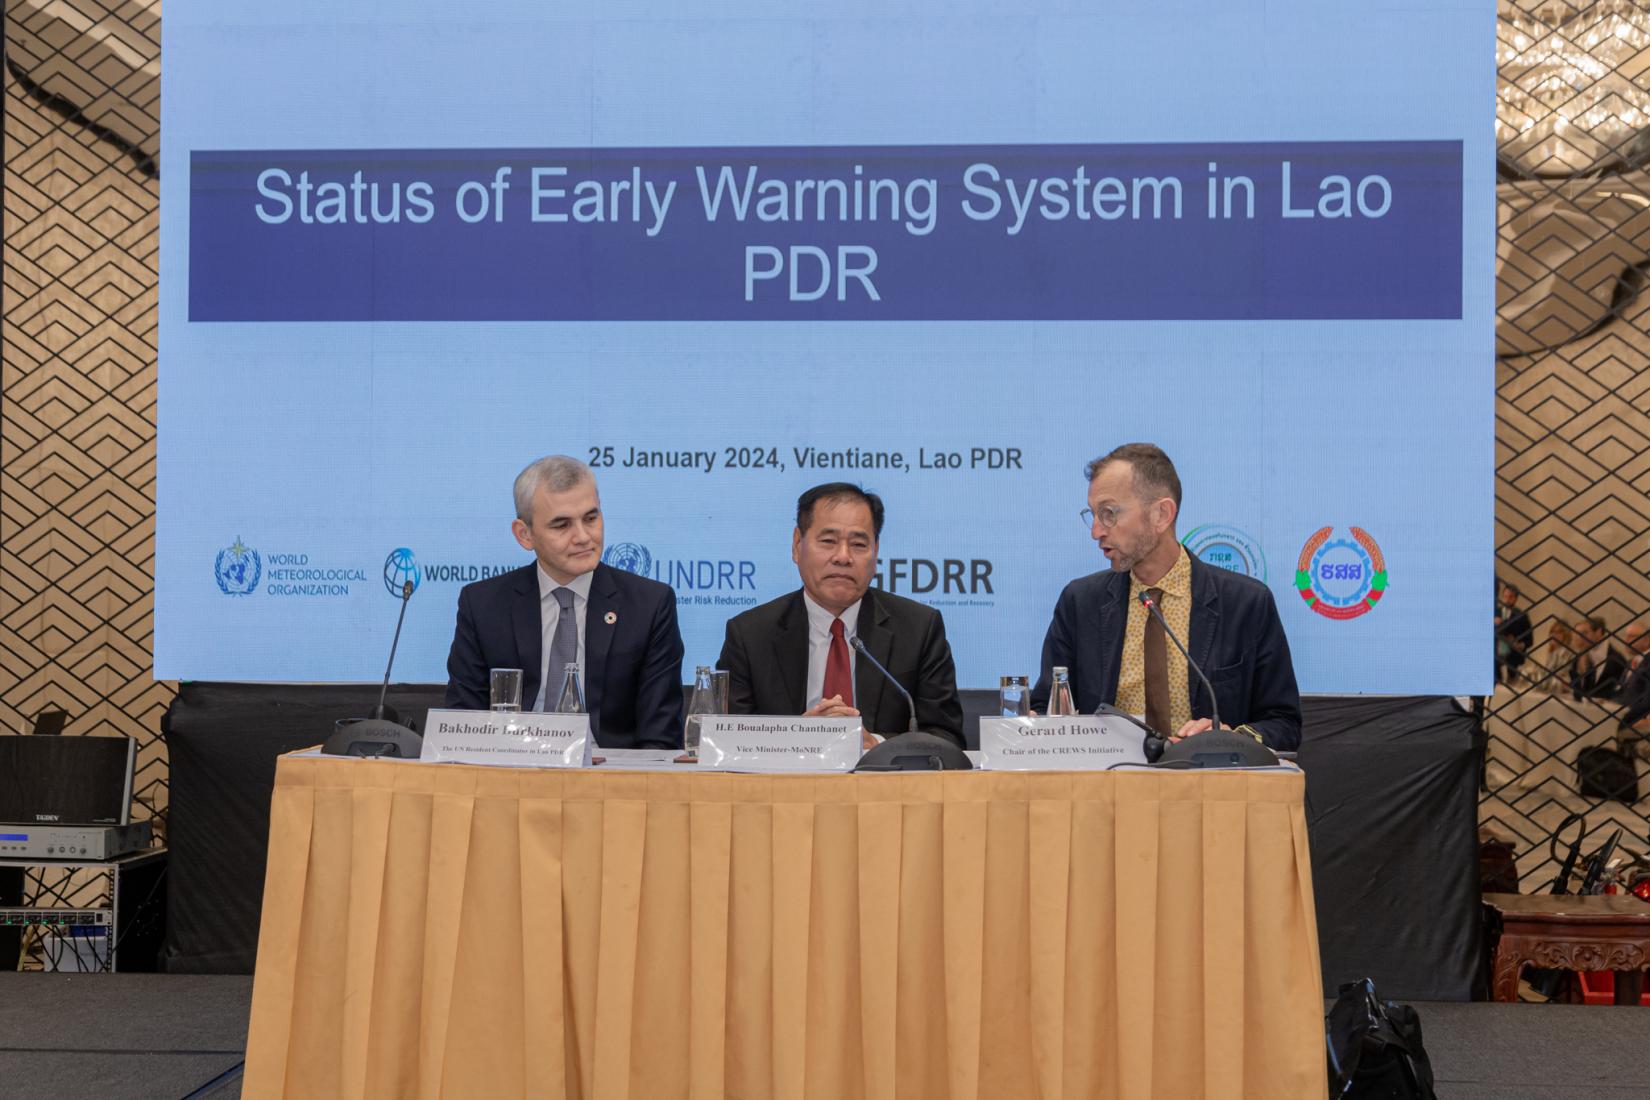 Status of Early Warning System in Lao PDR